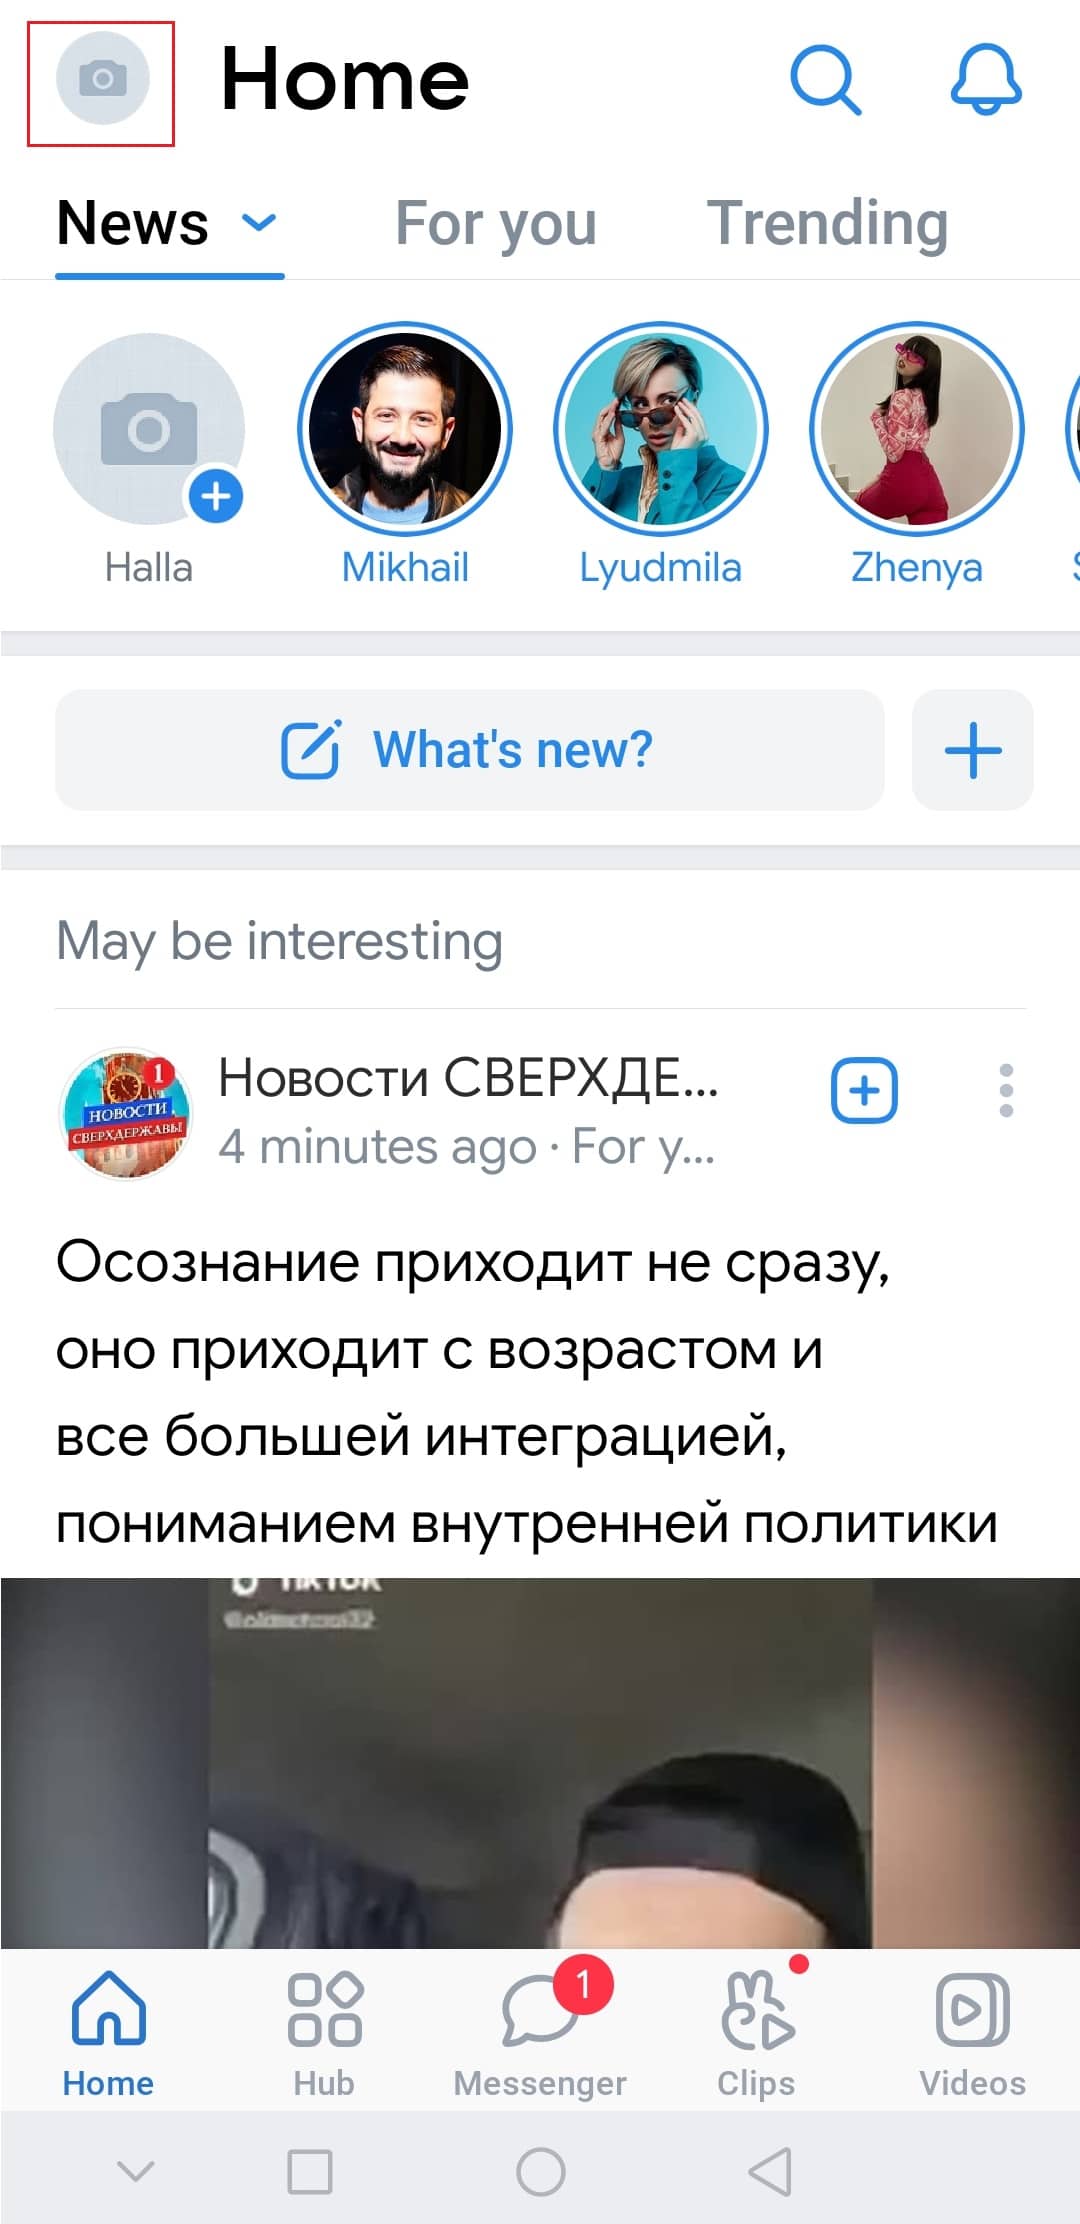 click on the Profile icon in VKontakte app